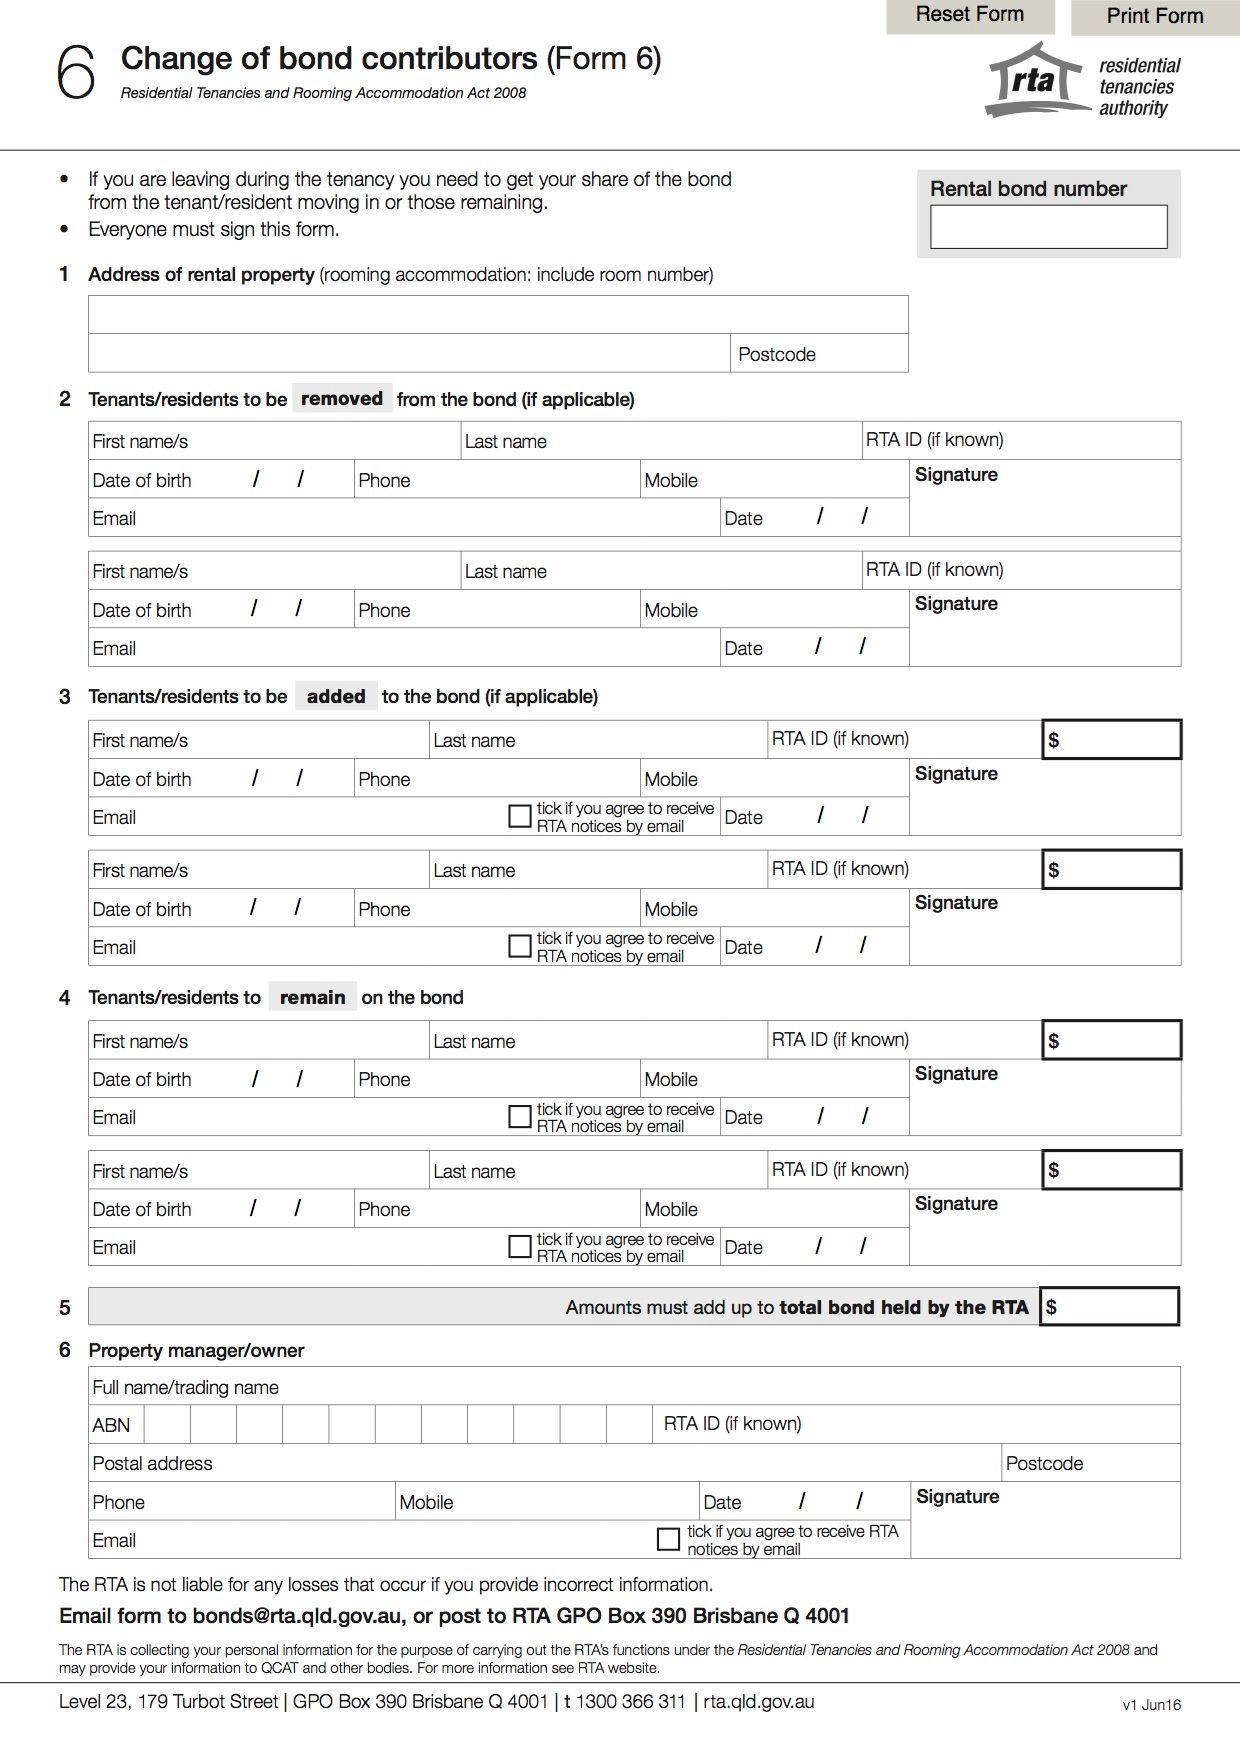 Residential Tenancy Agreement Qld Queensland Change Of Bond Contributors Form 6 Legal Forms And